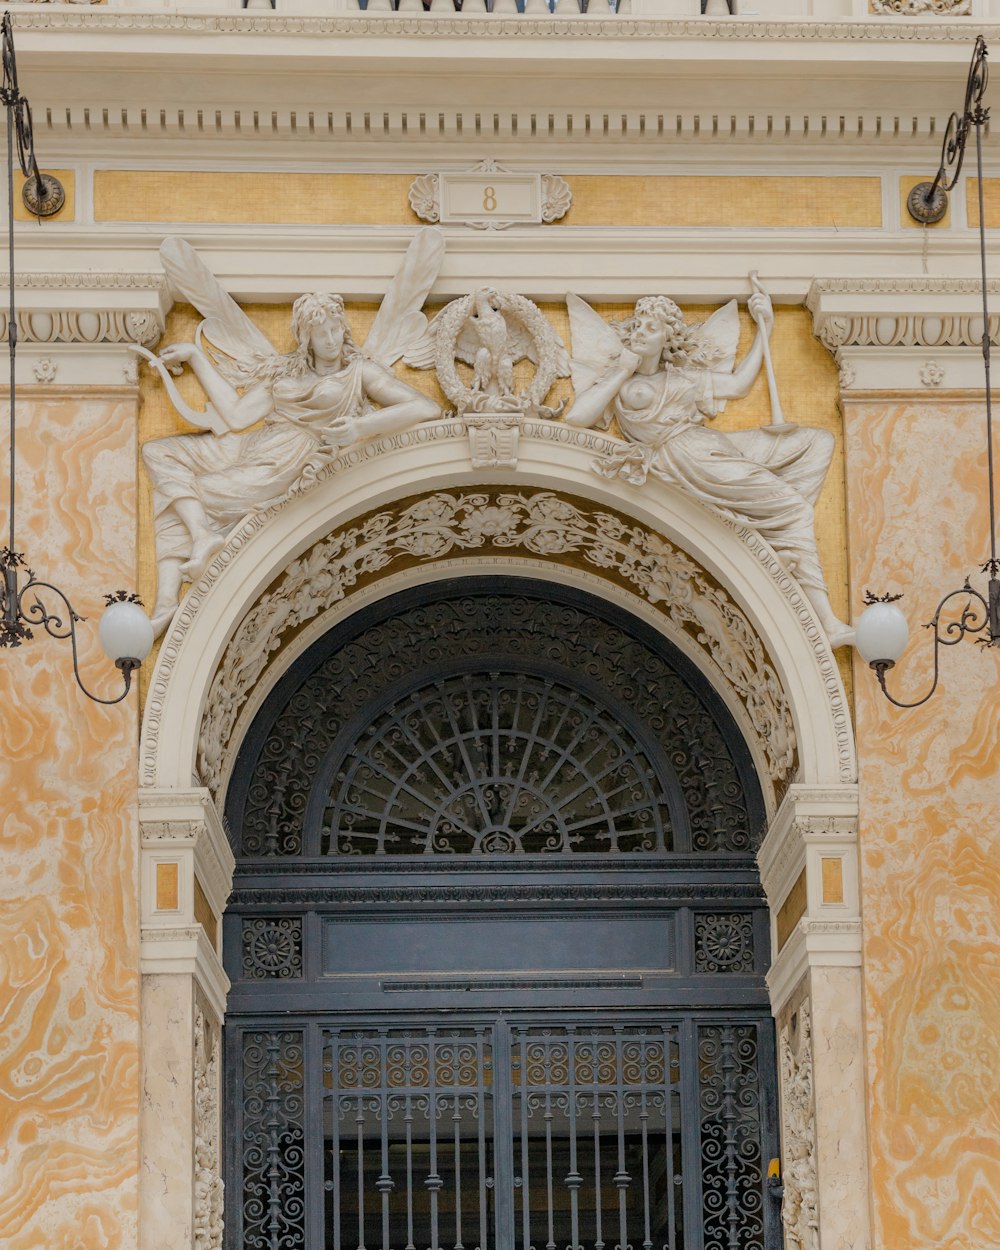 an ornate doorway with a clock above it